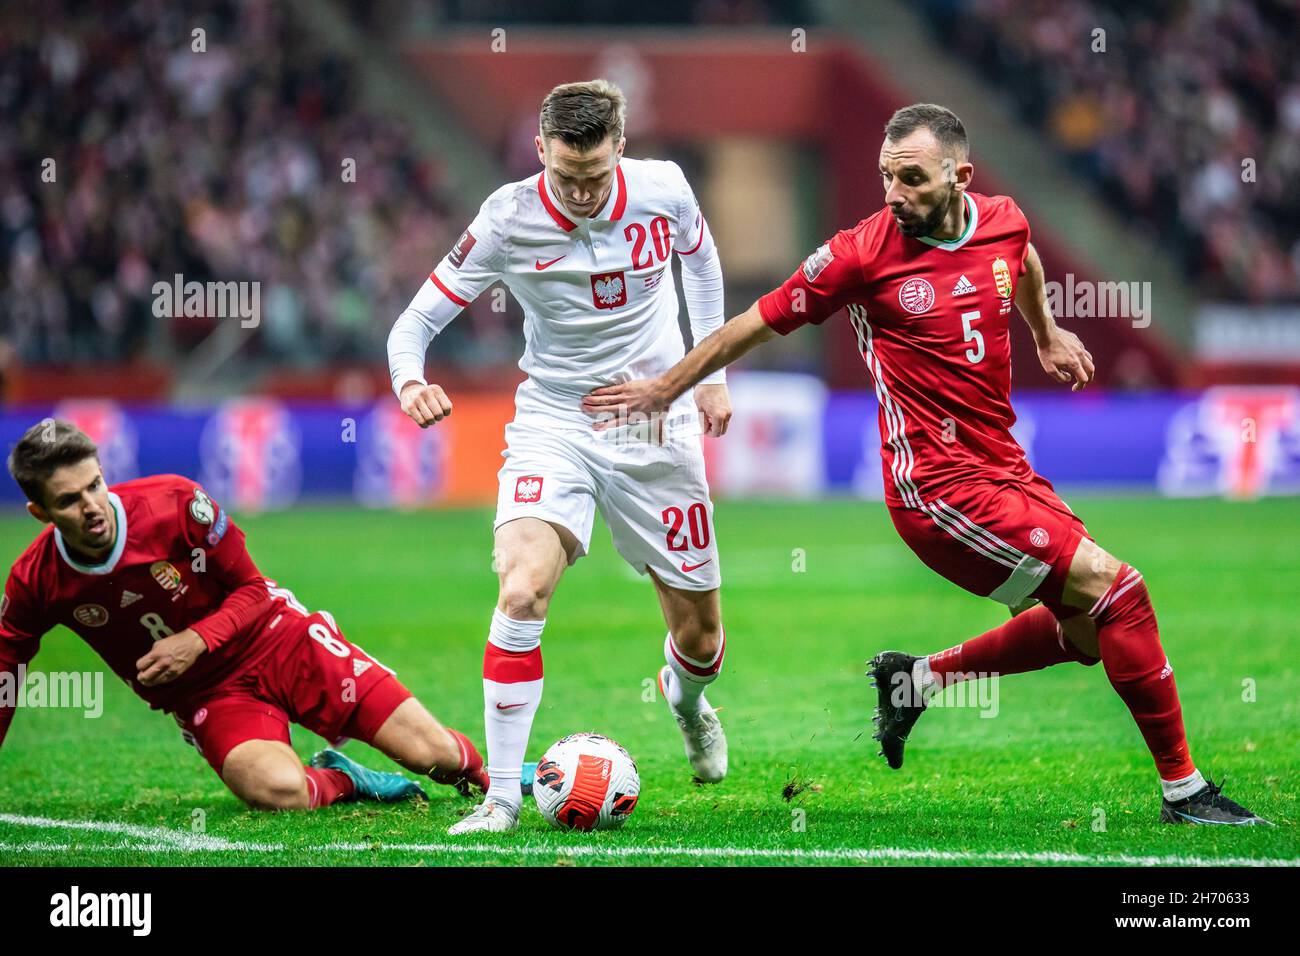 Warsaw, Poland. 15th Nov, 2021. Adam Nagy (L) of Hungary, Piotr Zielinski (C) of Poland, and Attila Fiola (R) of Hungary are seen in action during the FIFA World Cup 2022 Qatar qualifying match between Poland and Hungary at PGE Narodowy Stadium. Final score; Poland 1:2 Hungary. (Photo by Mikolaj Barbanell/SOPA Images/Sipa USA) Credit: Sipa USA/Alamy Live News Stock Photo